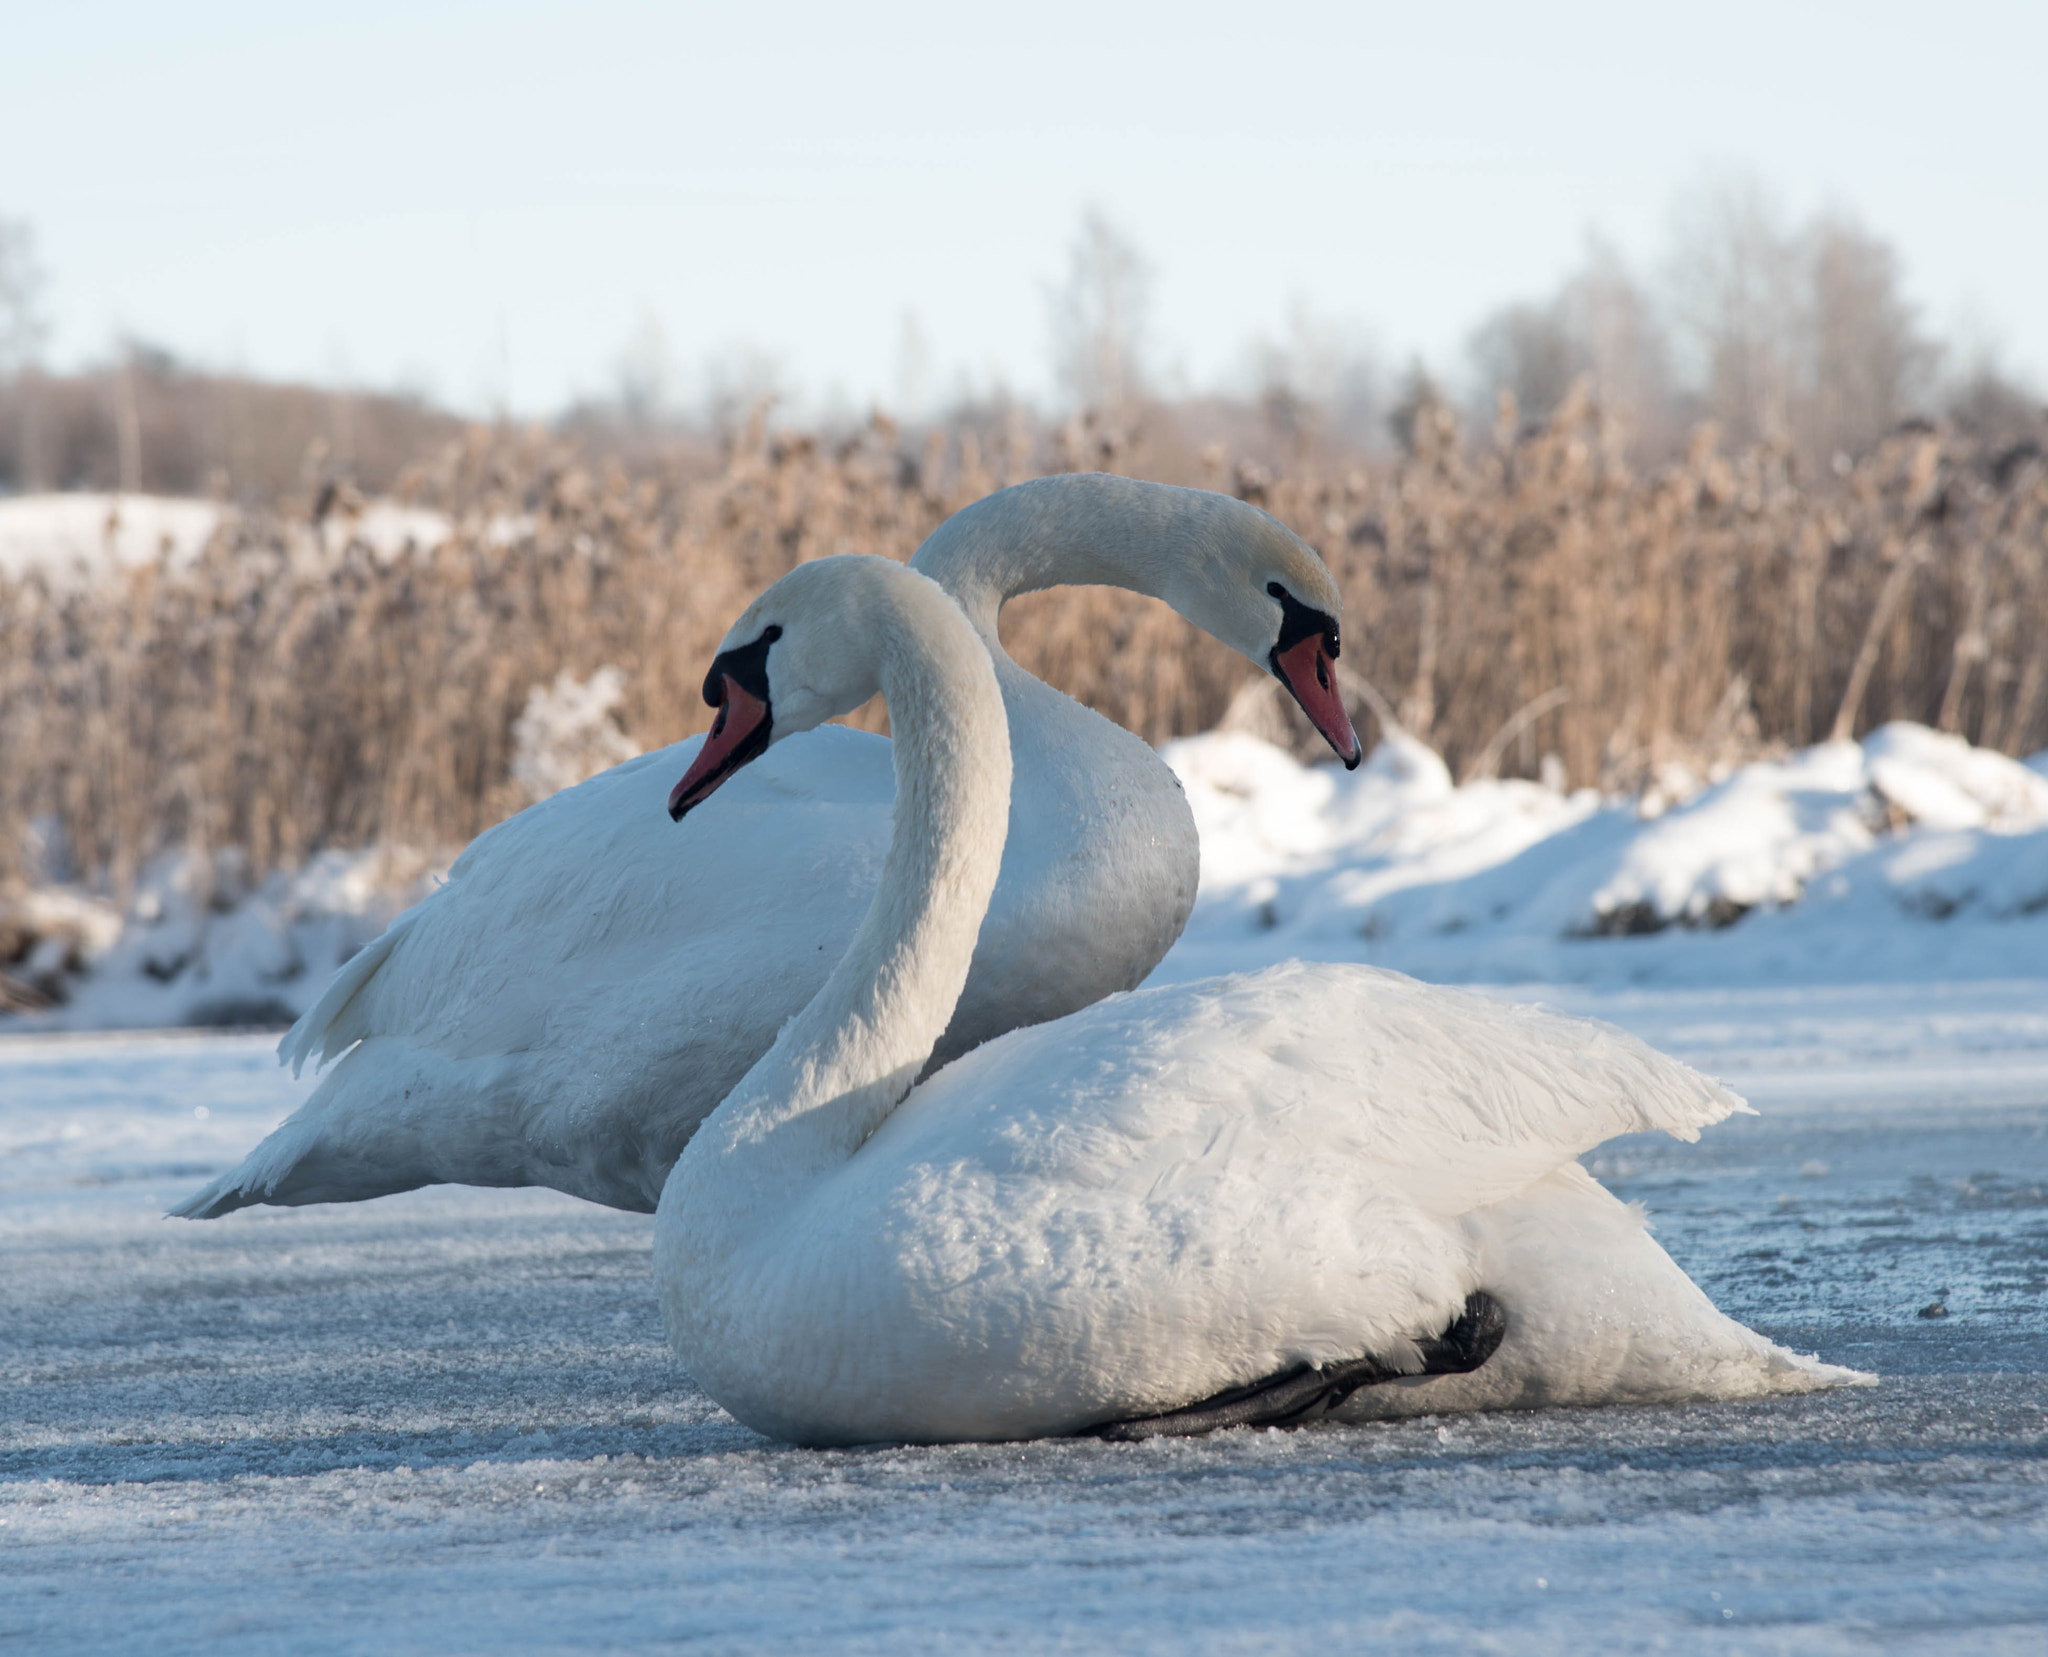 two white swans sitting on ice in winter